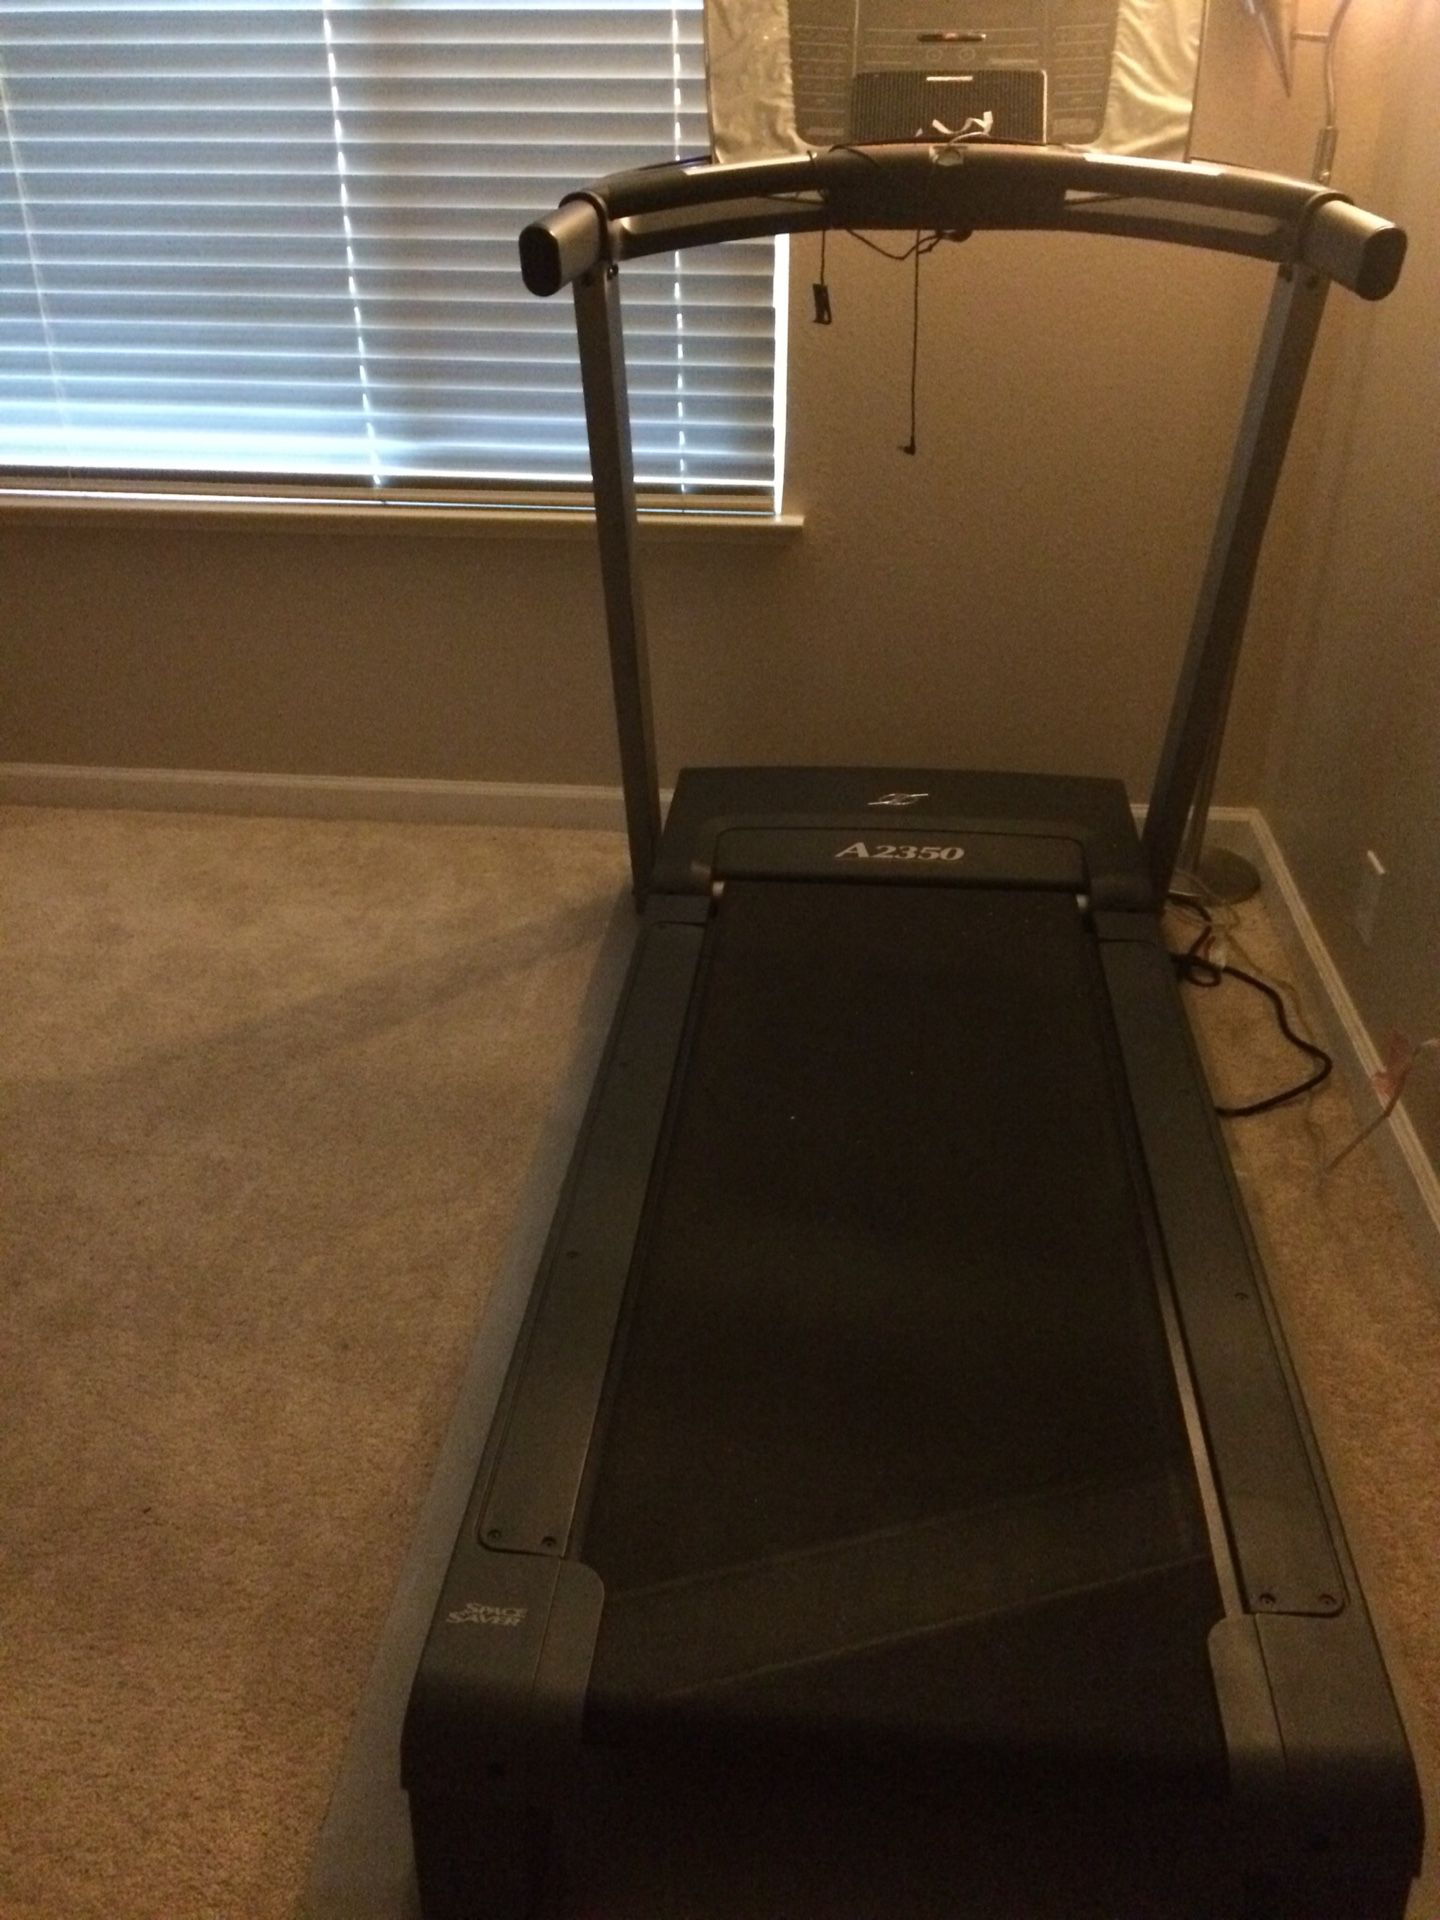 Treadmill (NordicTrack) A2350 - foldable space saver